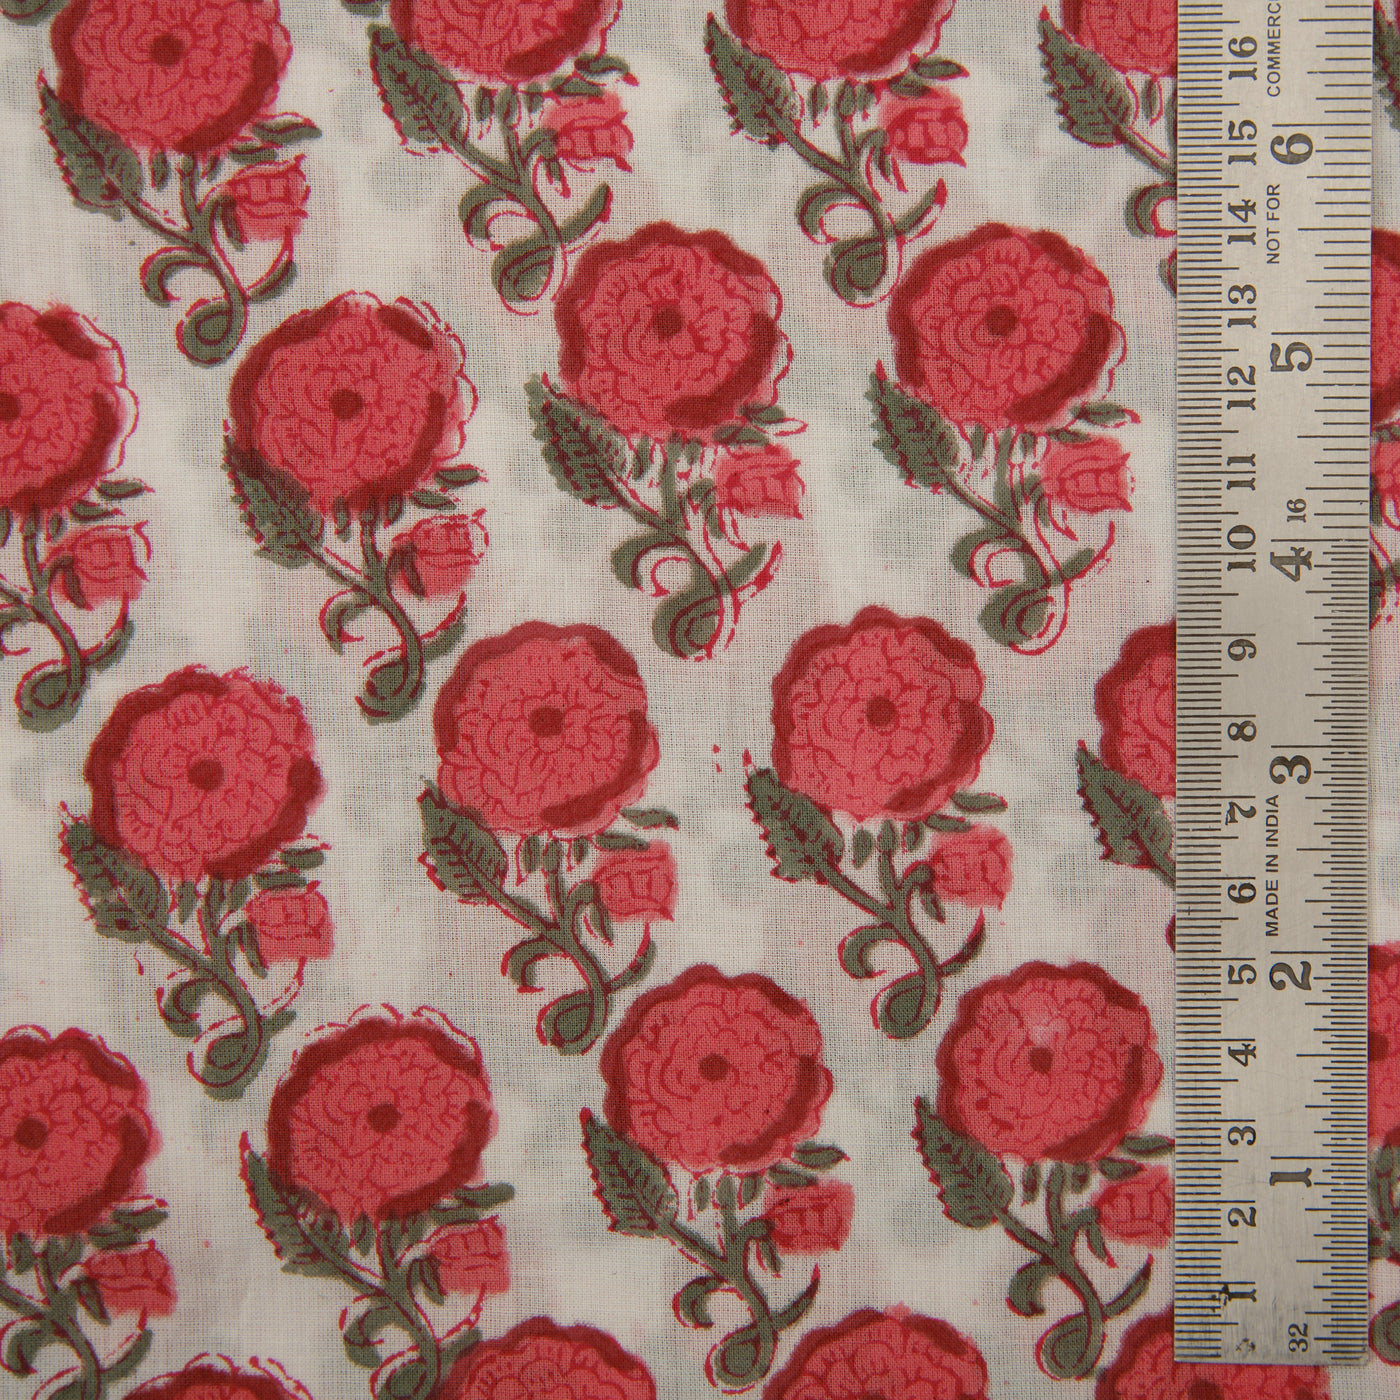 Raspberry Red, Army Green Indian Floral Hand Block Printed 100% Pure Cotton Cloth, Women's clothing, Fabric for Curtains Pillows Dresses Bag